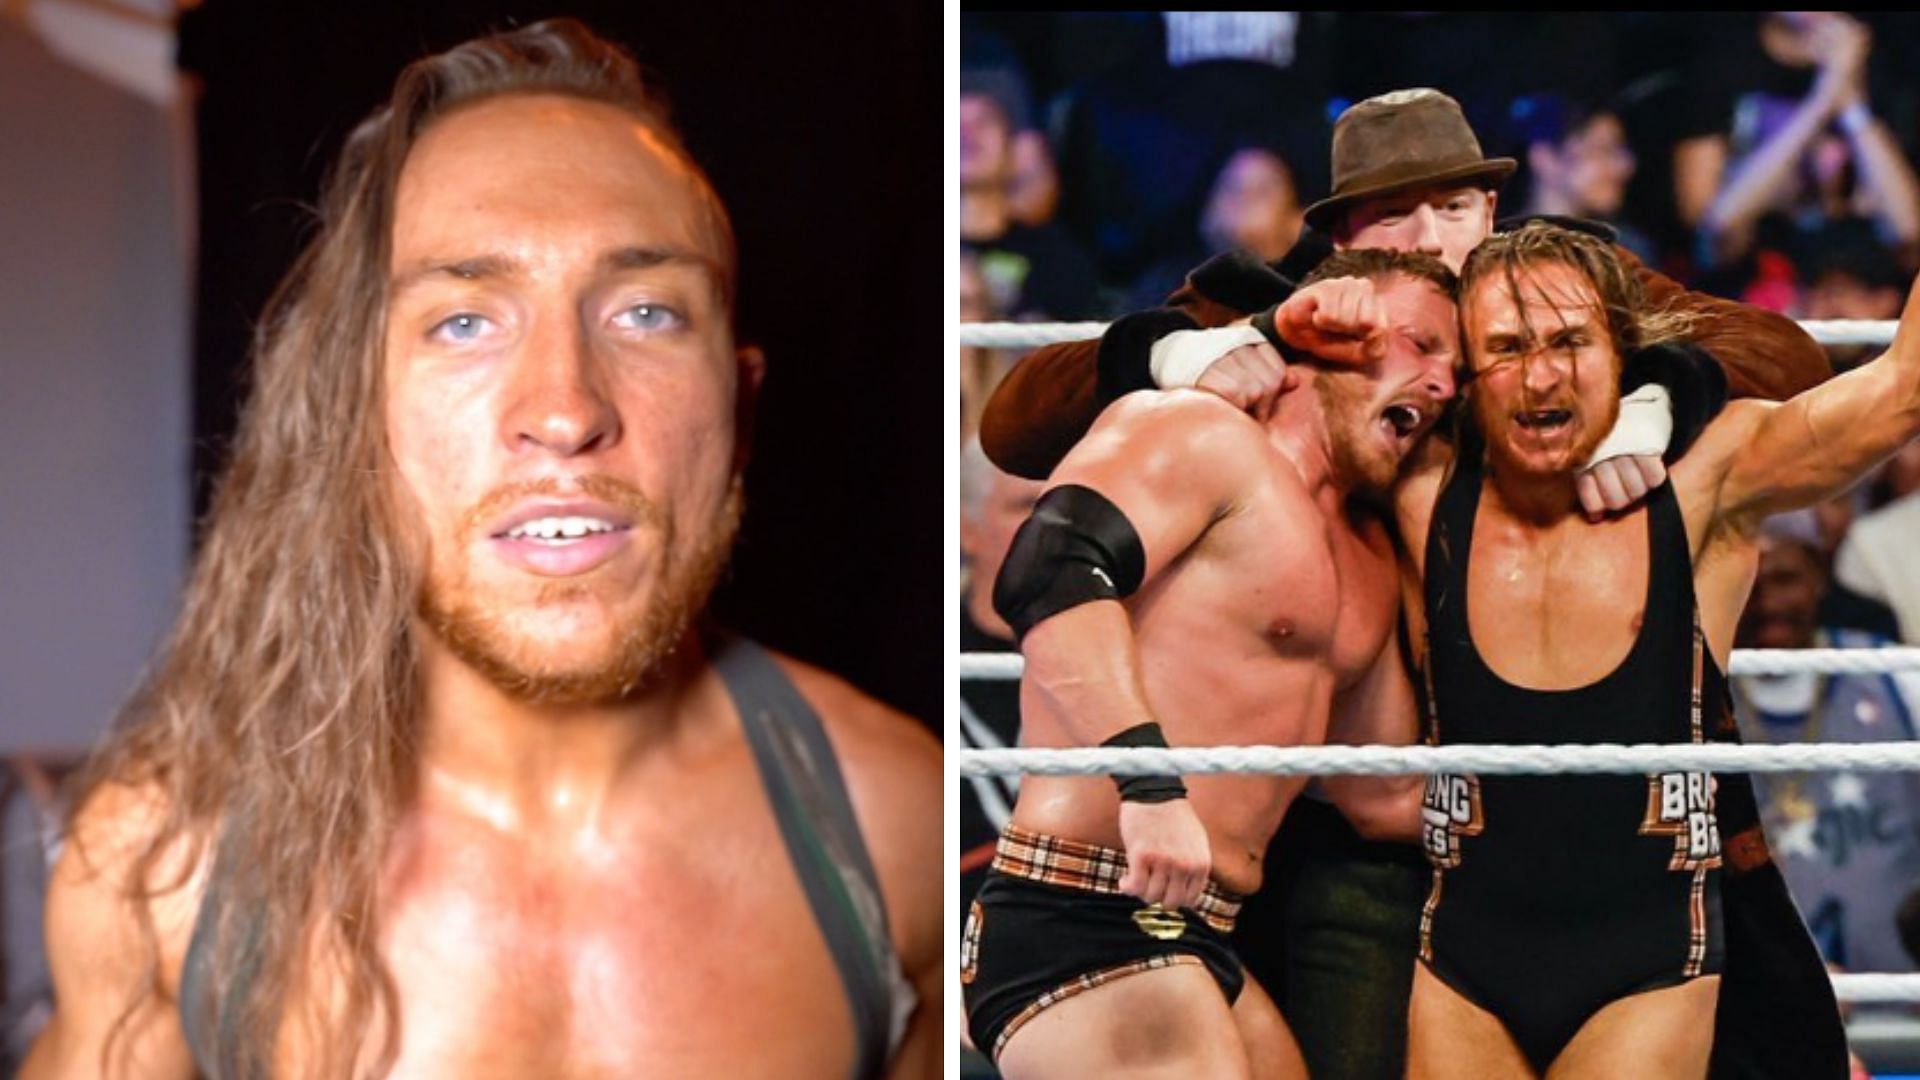 Pete Dunne is a member of The Brawling Brutes